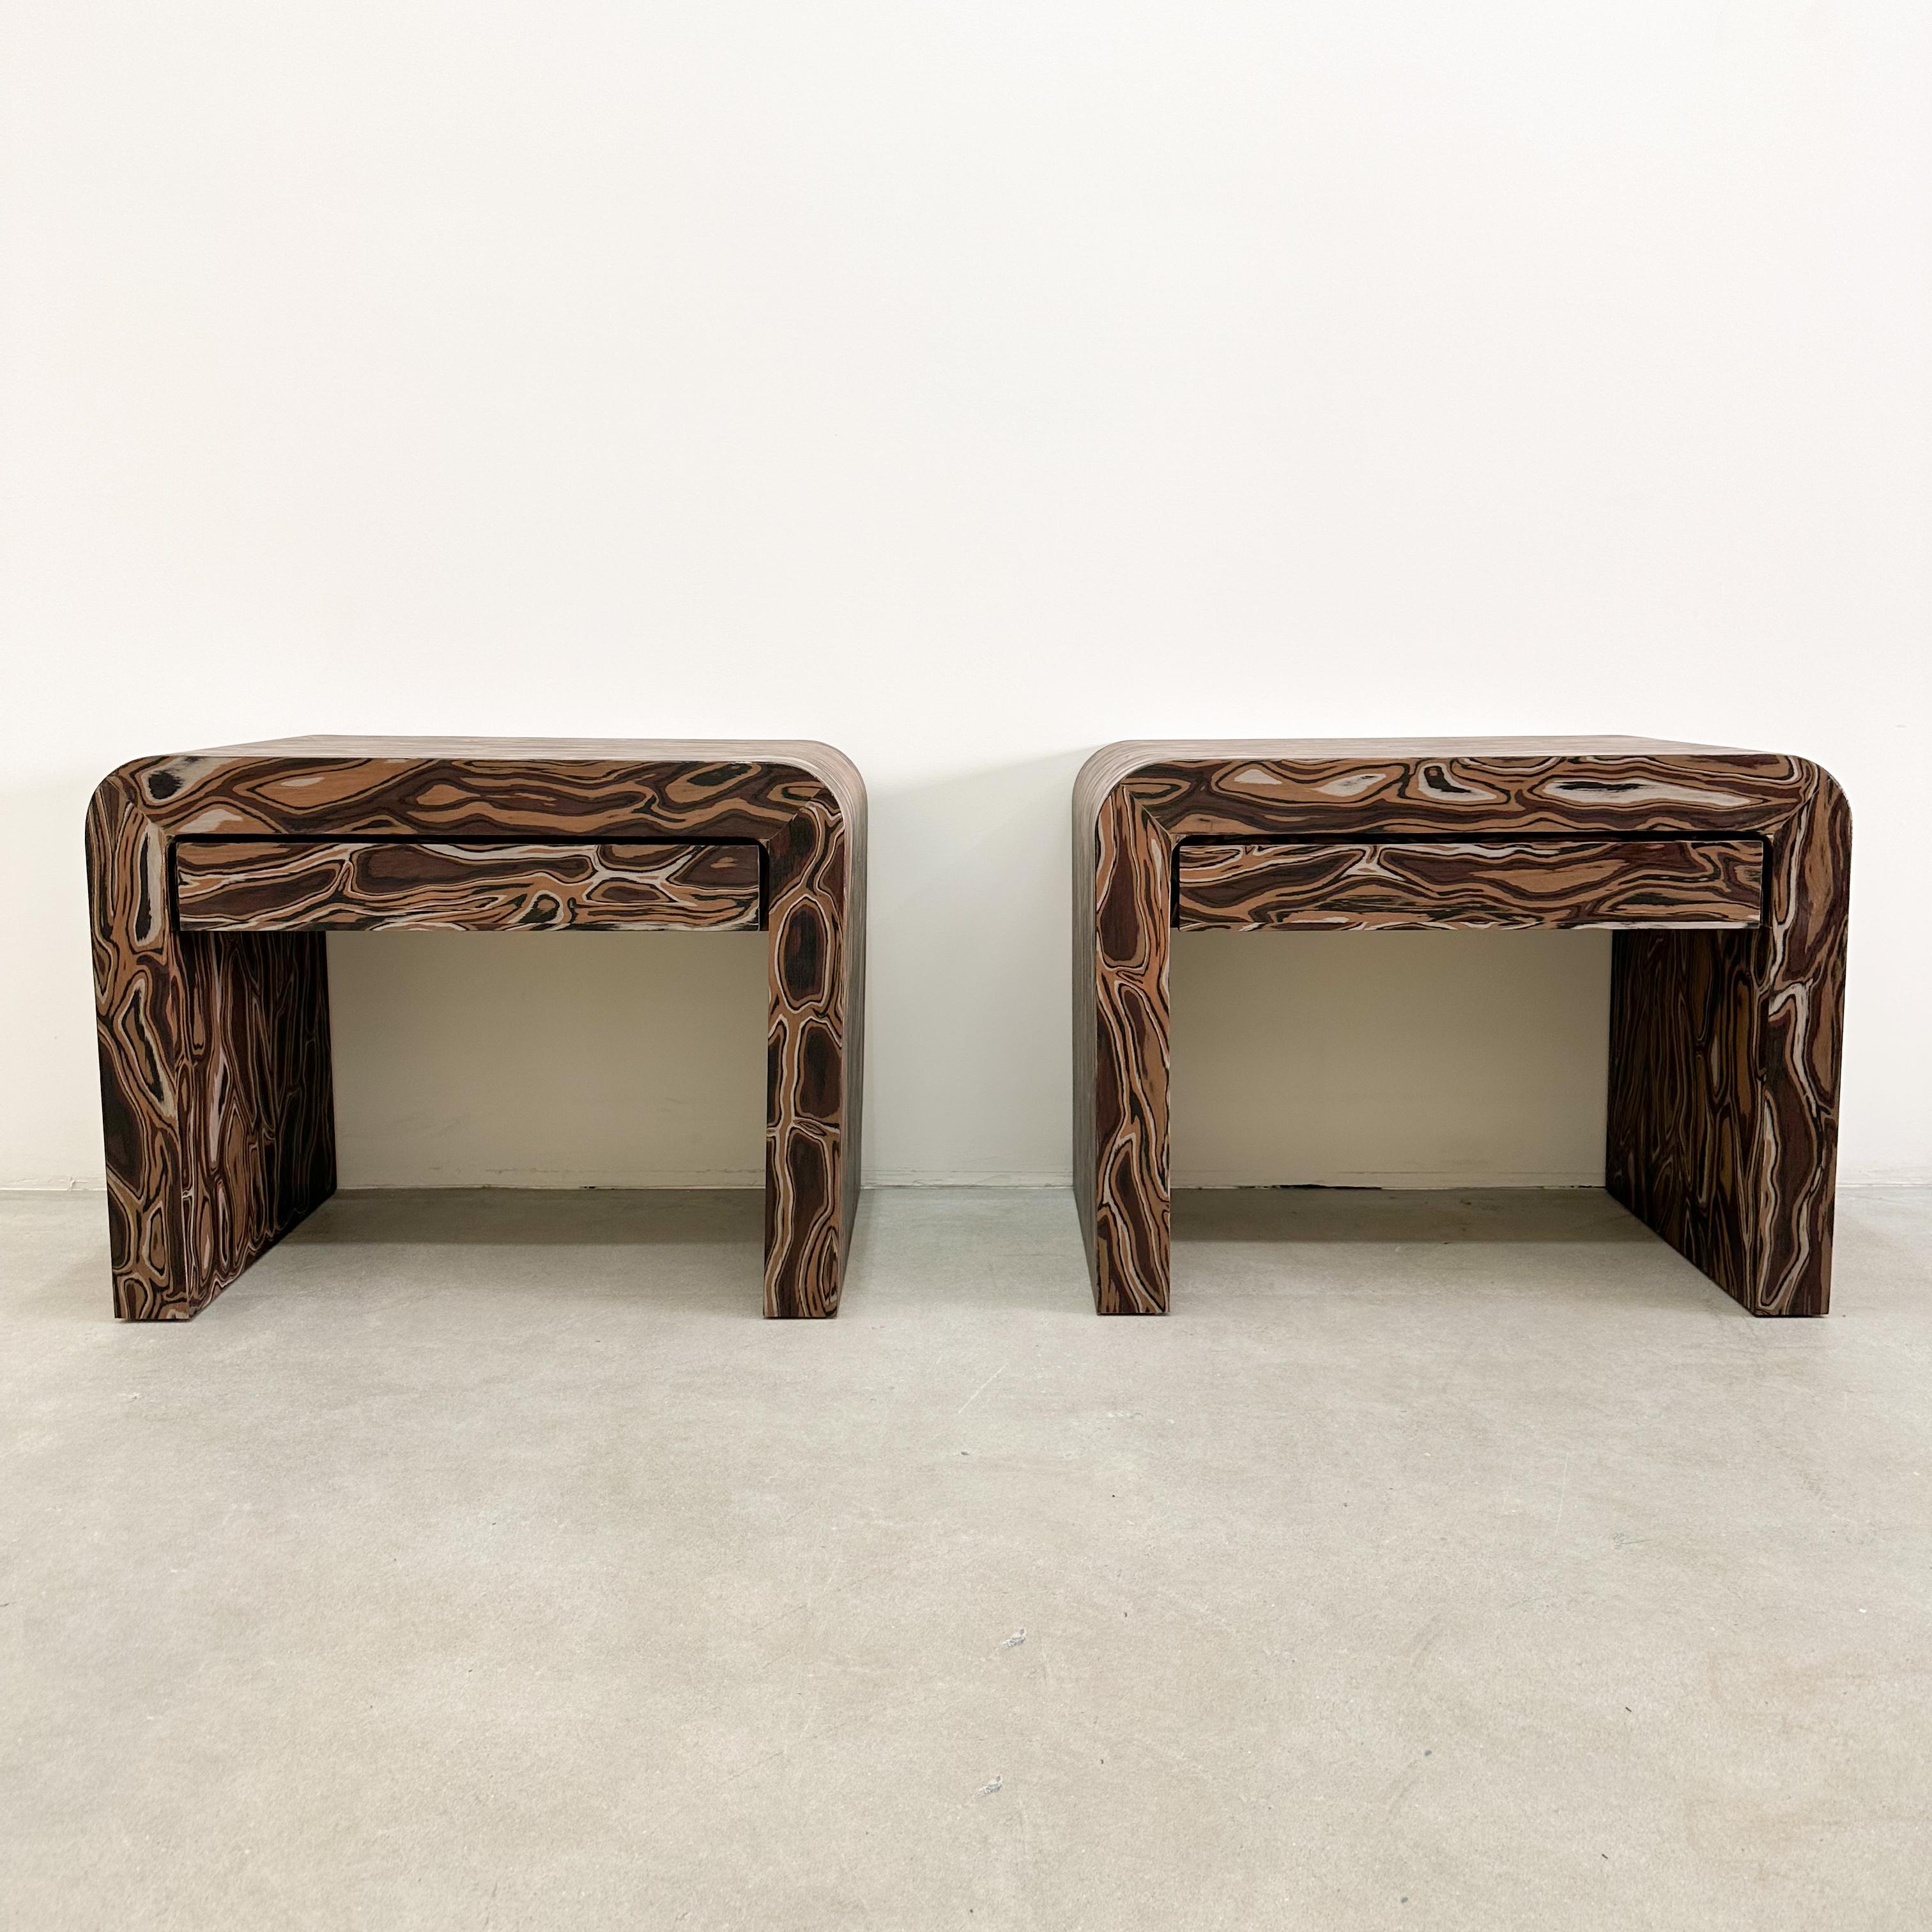 Pair of Vintage Waterfall Nightstands Featuring Kengo Kuma Veneer.

The vintage nightstands have been meticulously re-veneered, featuring the original design by Kengo Kuma, a renowned architect recognized for his adept use of natural materials to